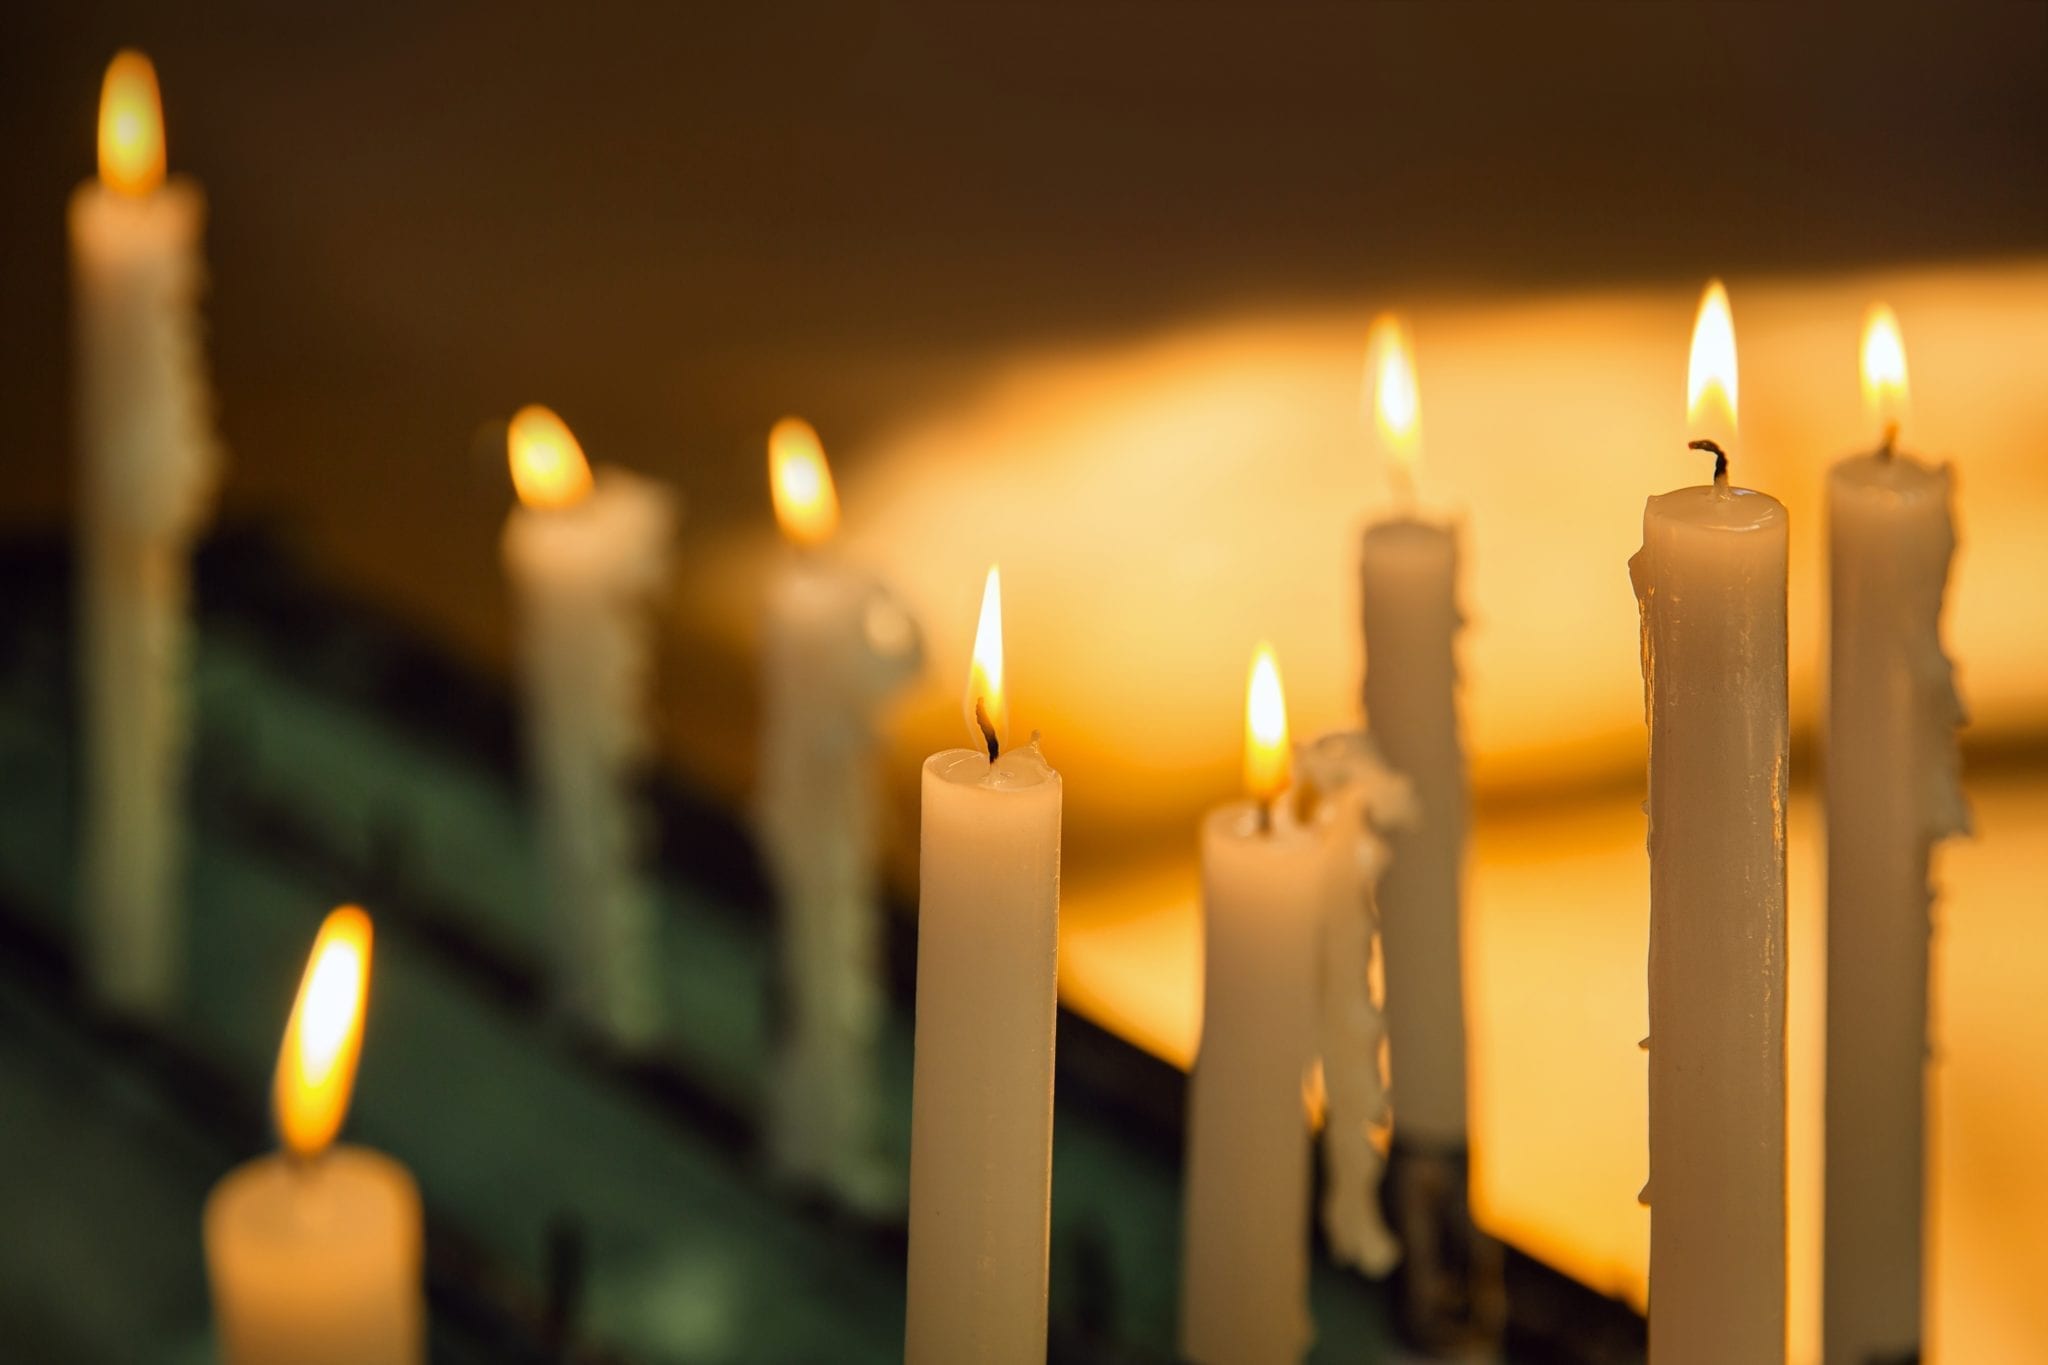 Funeral Home Negligence in Florida: What to Watch For